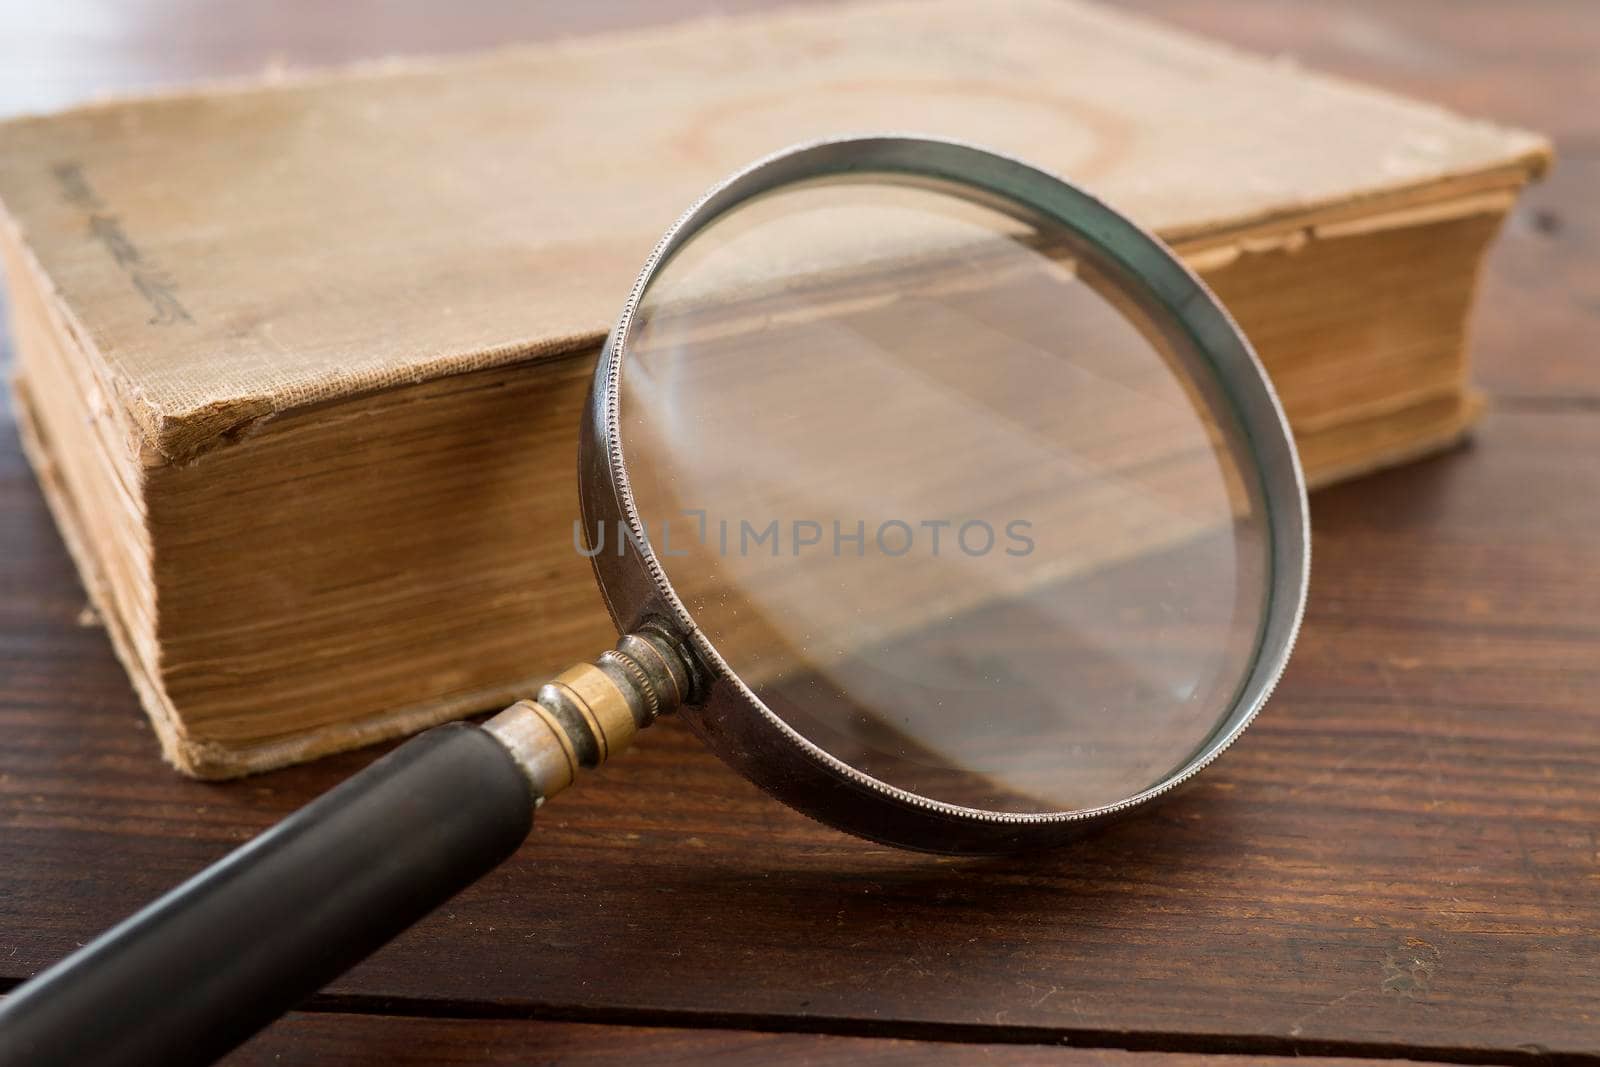 Magnifying glass and old book by fivepointsix